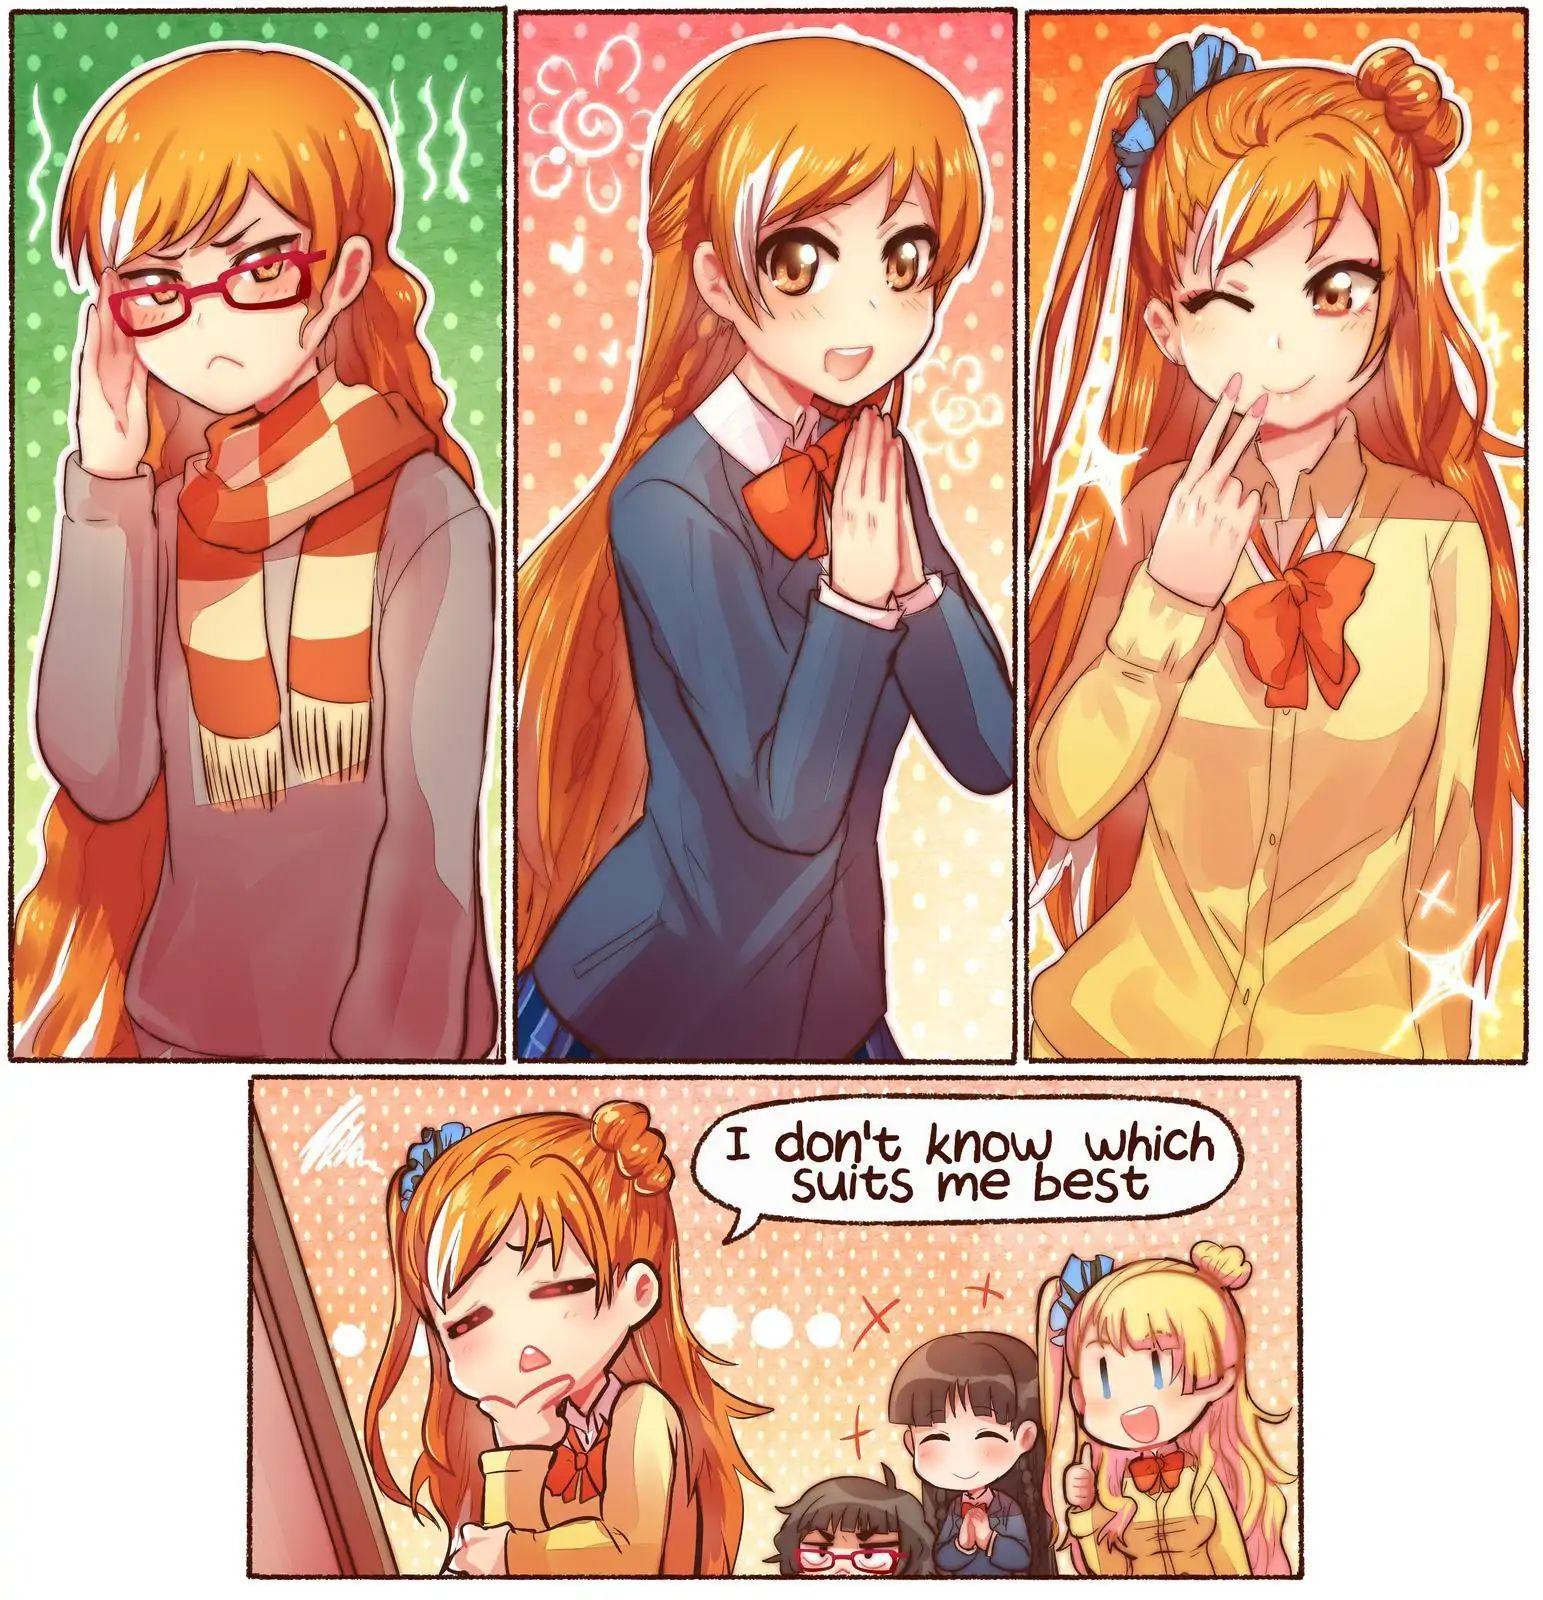 Read The Daily Life Of Crunchyroll-Hime Chapter 10 on Mangakakalot